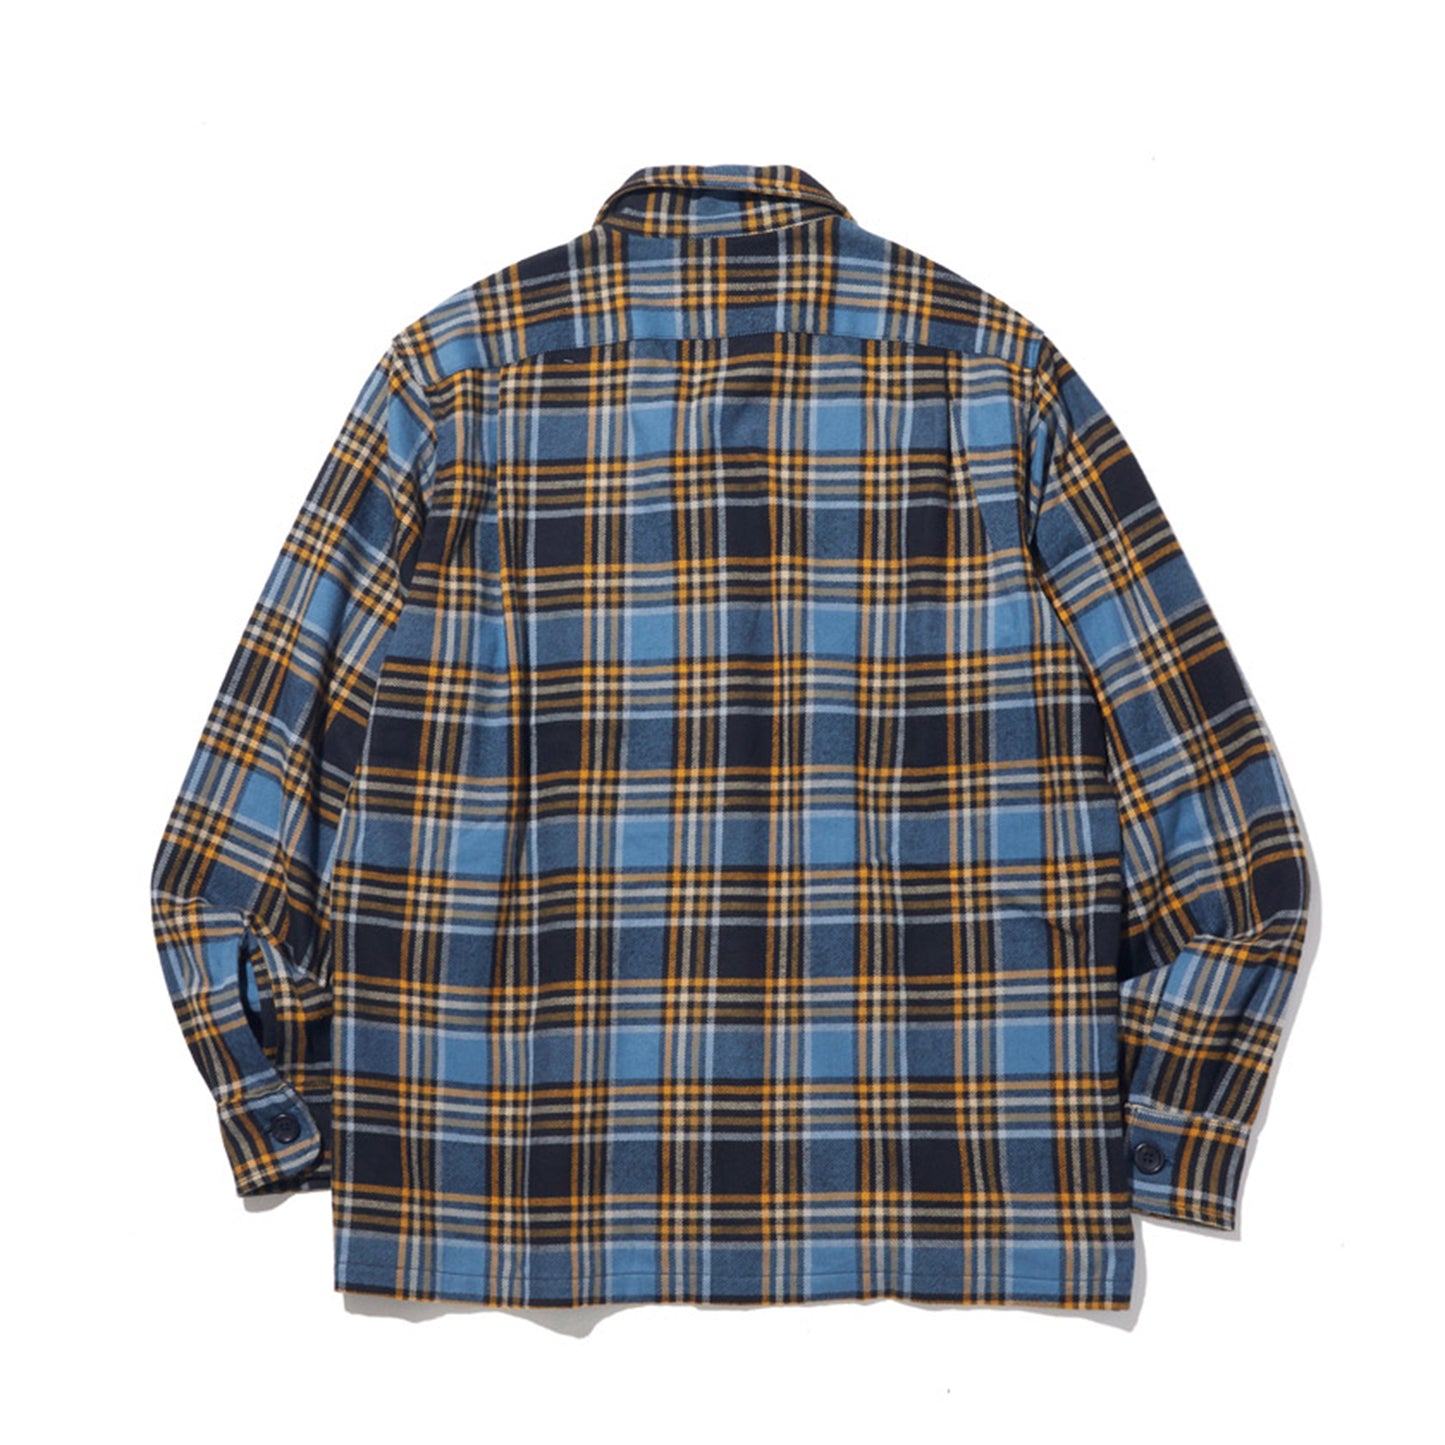 5 Pkt Canyon Shirt in Blue Jay